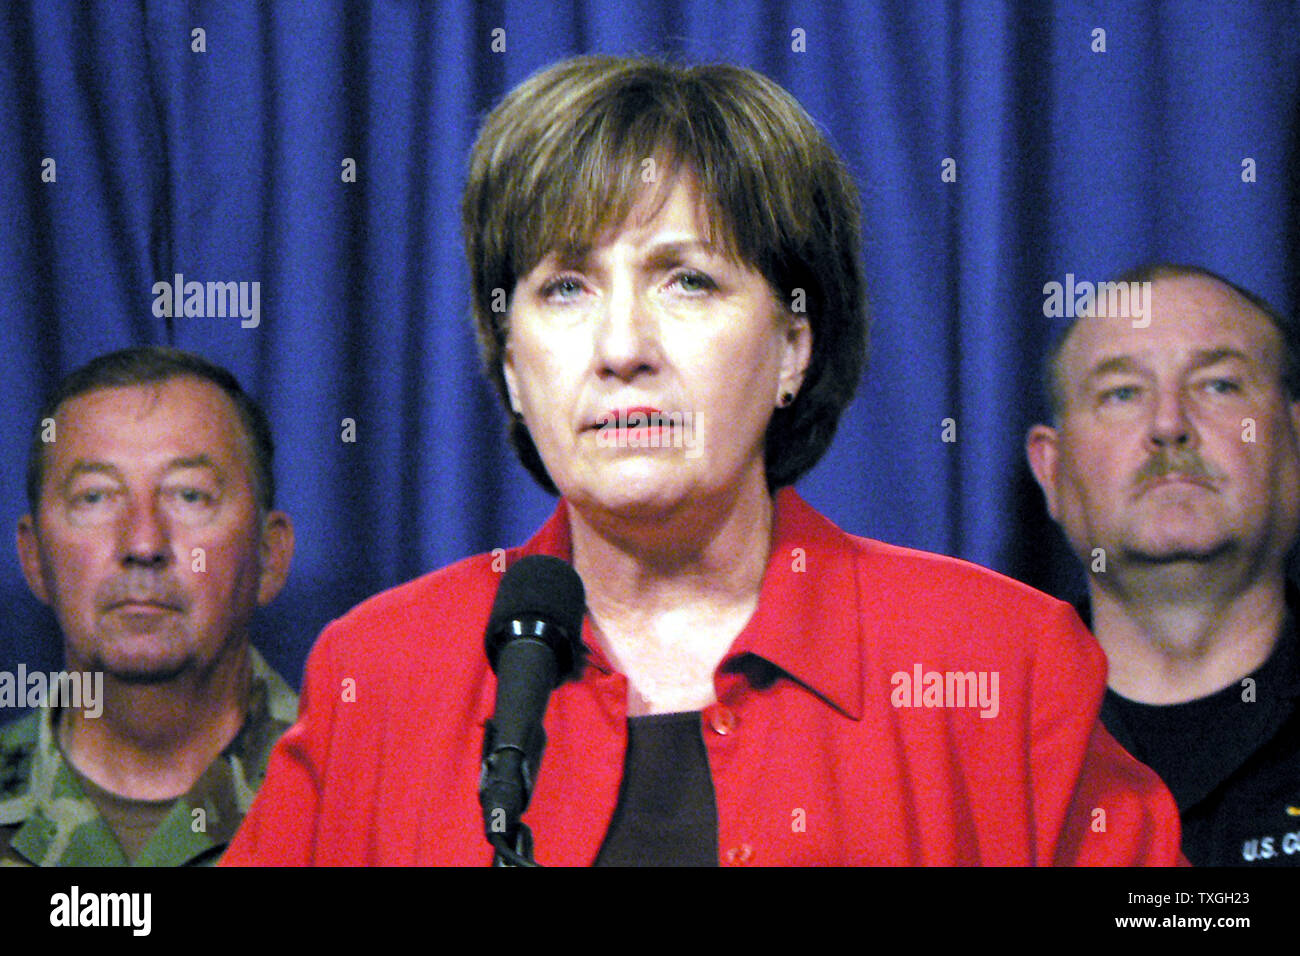 Louisiana Gov. Kathleen Blanco, backed by (L-R), General Arnceno, LA National Guard and Vice Adm. Thad Allen, Director of FEMA Field Operations, hold a joint press conference in Baton Rouge, LA on September 22, 2005 to warn residents of Lake Charles and southern Louisiana to evacuate before Hurricane Rita makes landfall.   (UPI Photo/James Terry III) Stock Photo